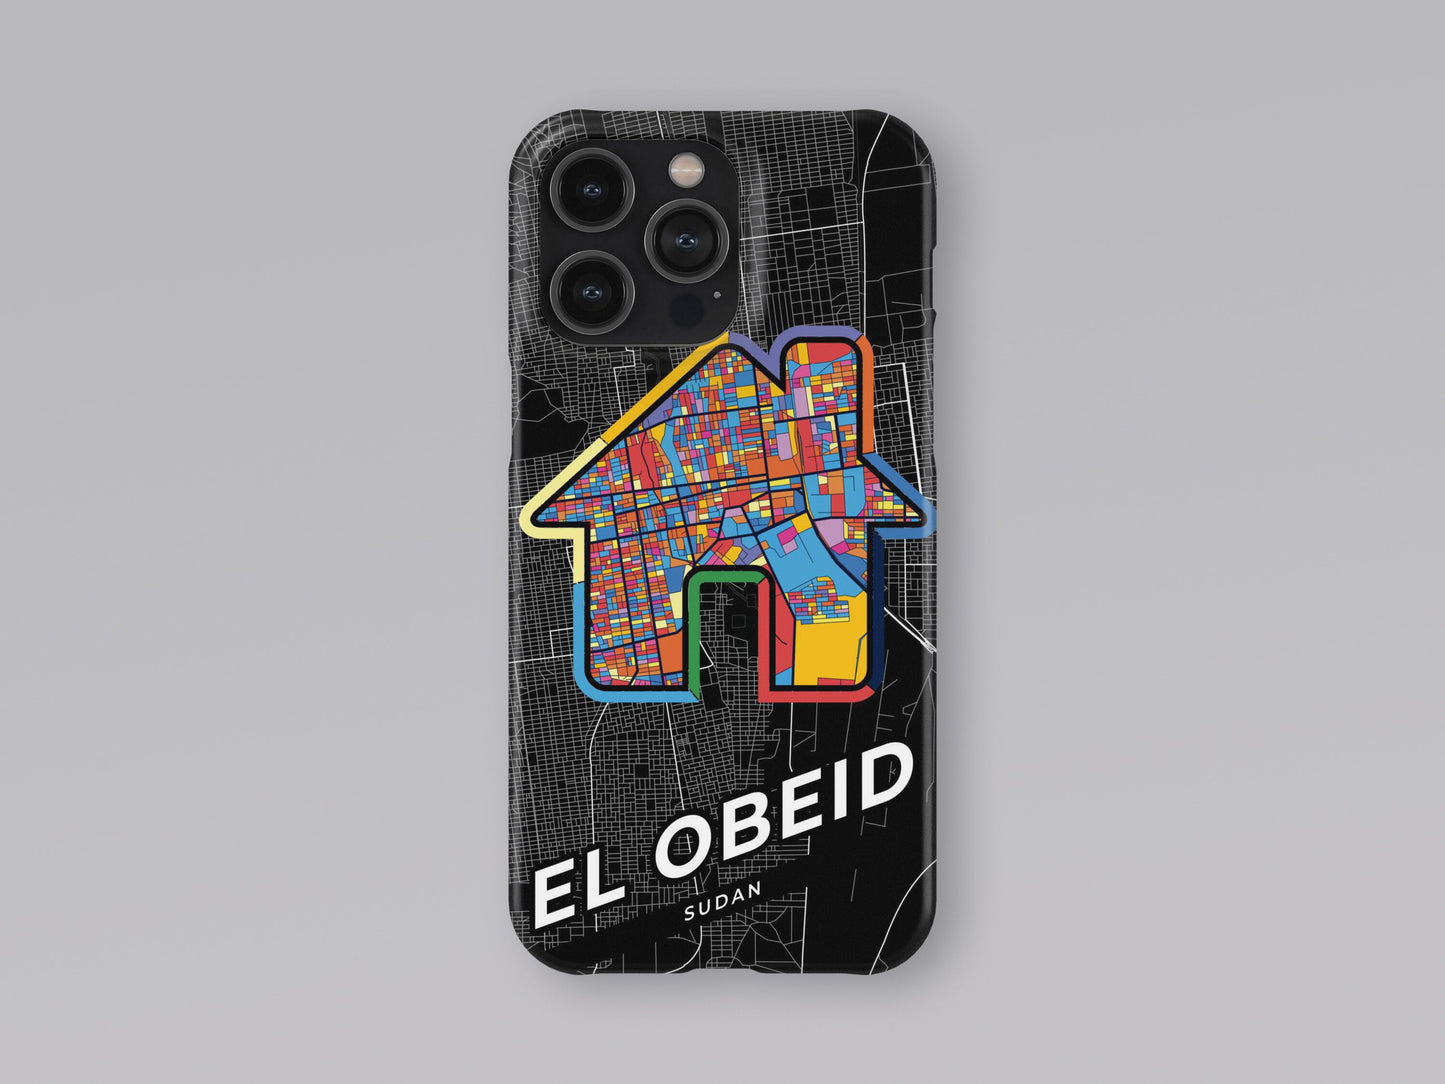 El Obeid Sudan slim phone case with colorful icon. Birthday, wedding or housewarming gift. Couple match cases. 3